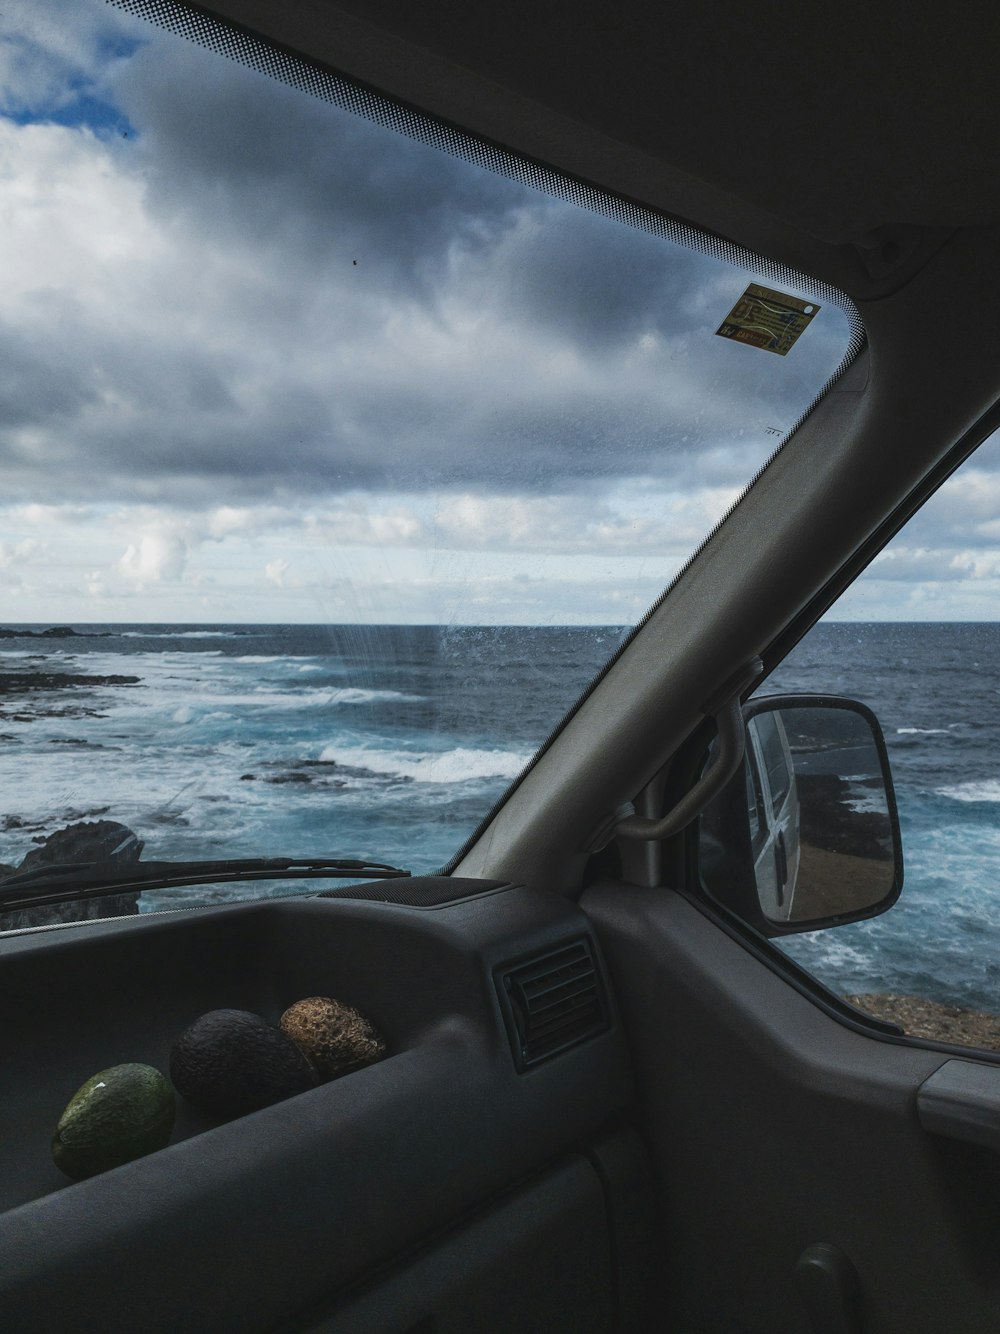 a view of the ocean from inside a vehicle